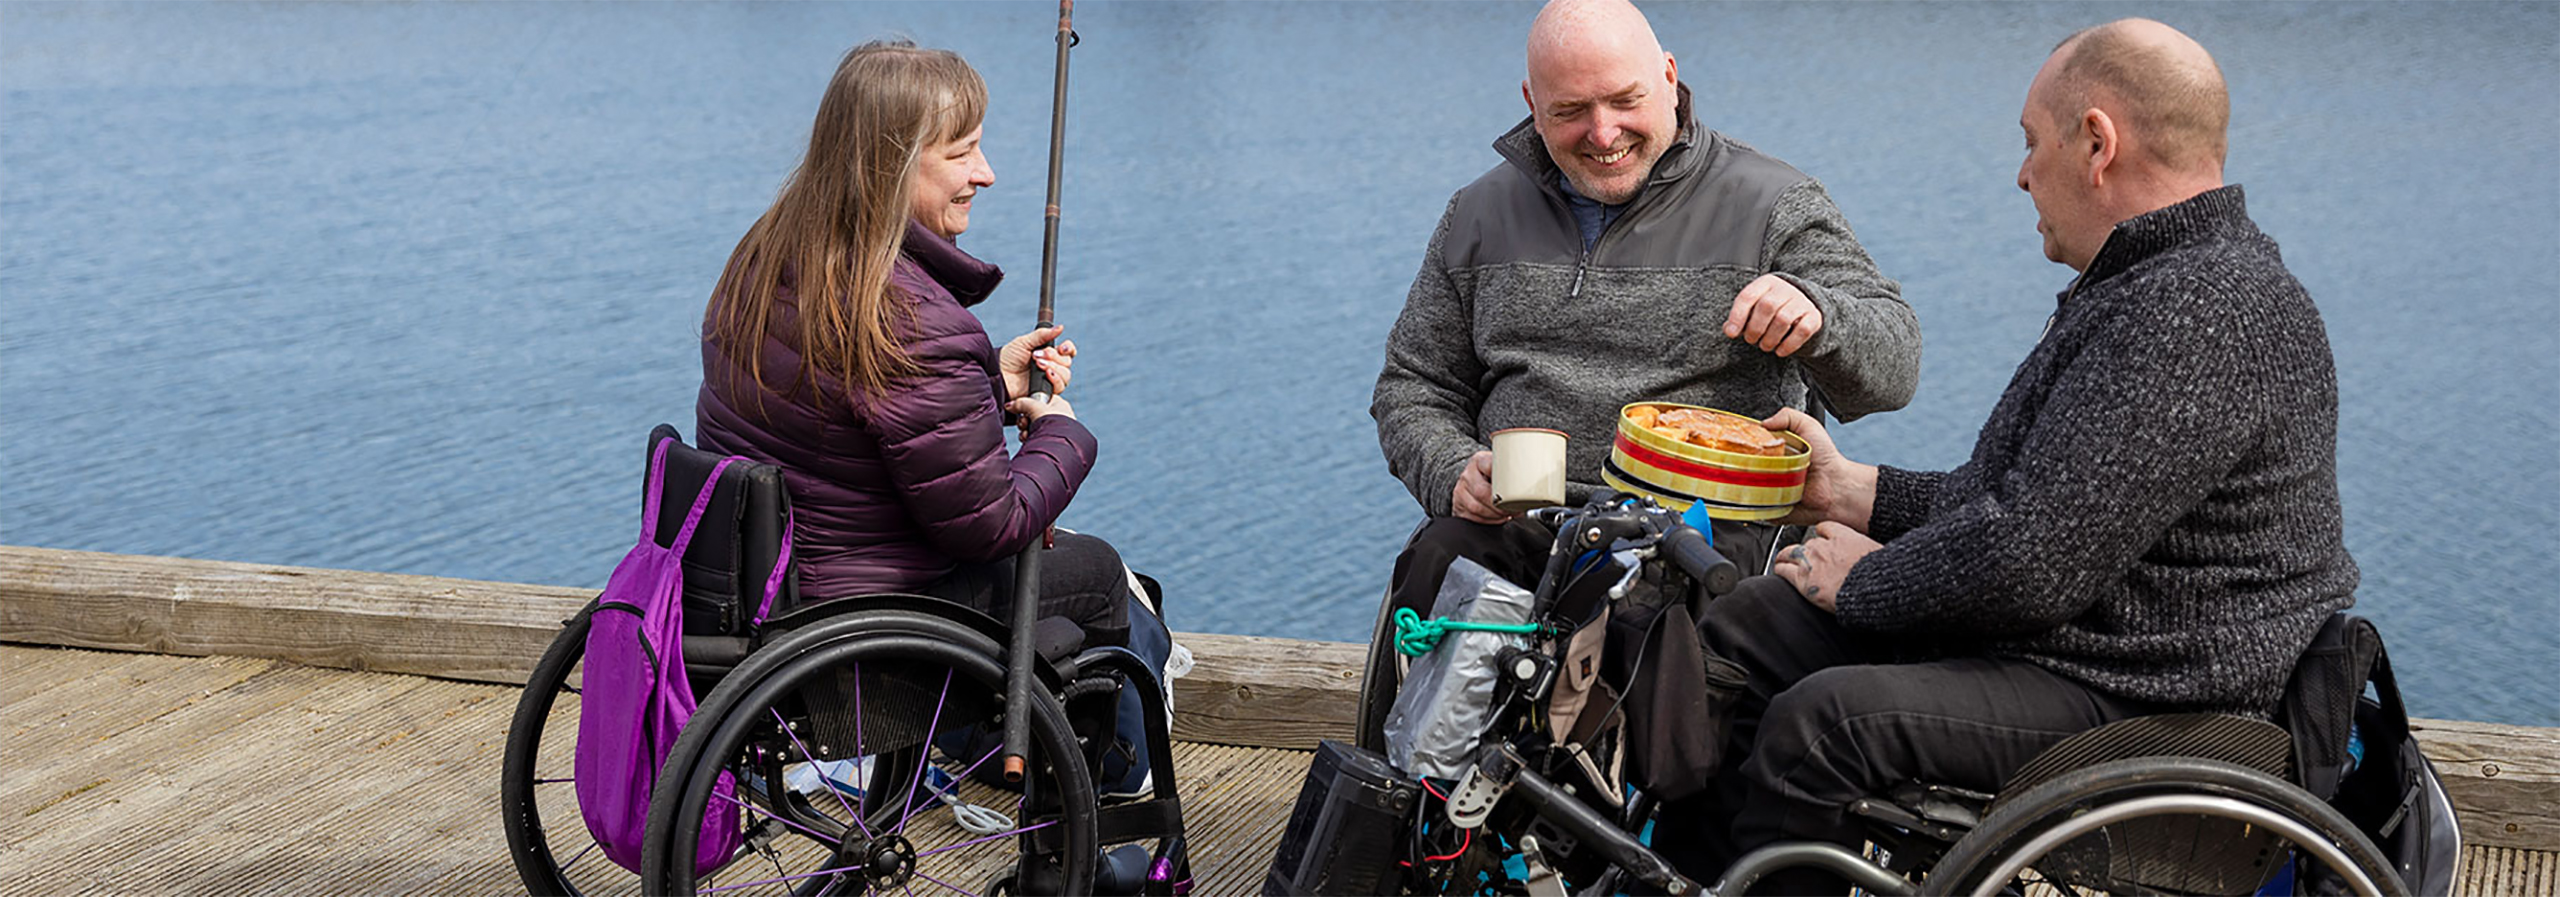 three people in a wheelchairs sitting on a dock, fishing, eating and smiling